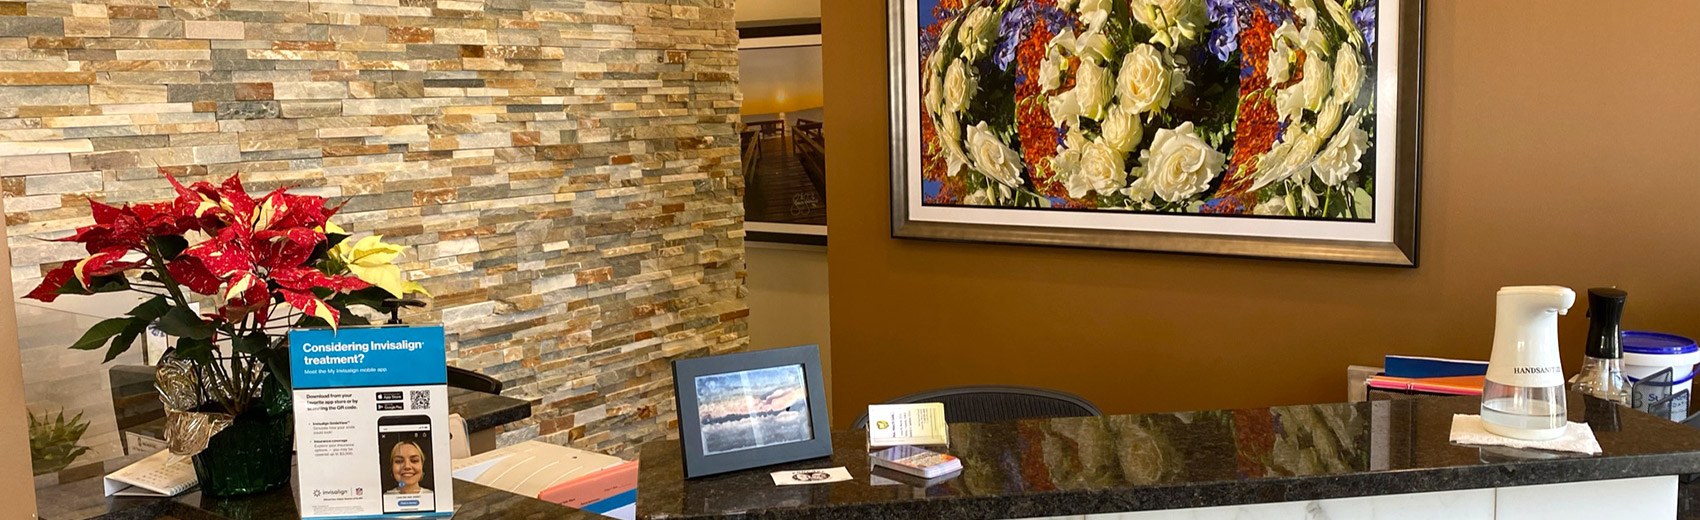 Office Reception - West Suburban Oral Health Care